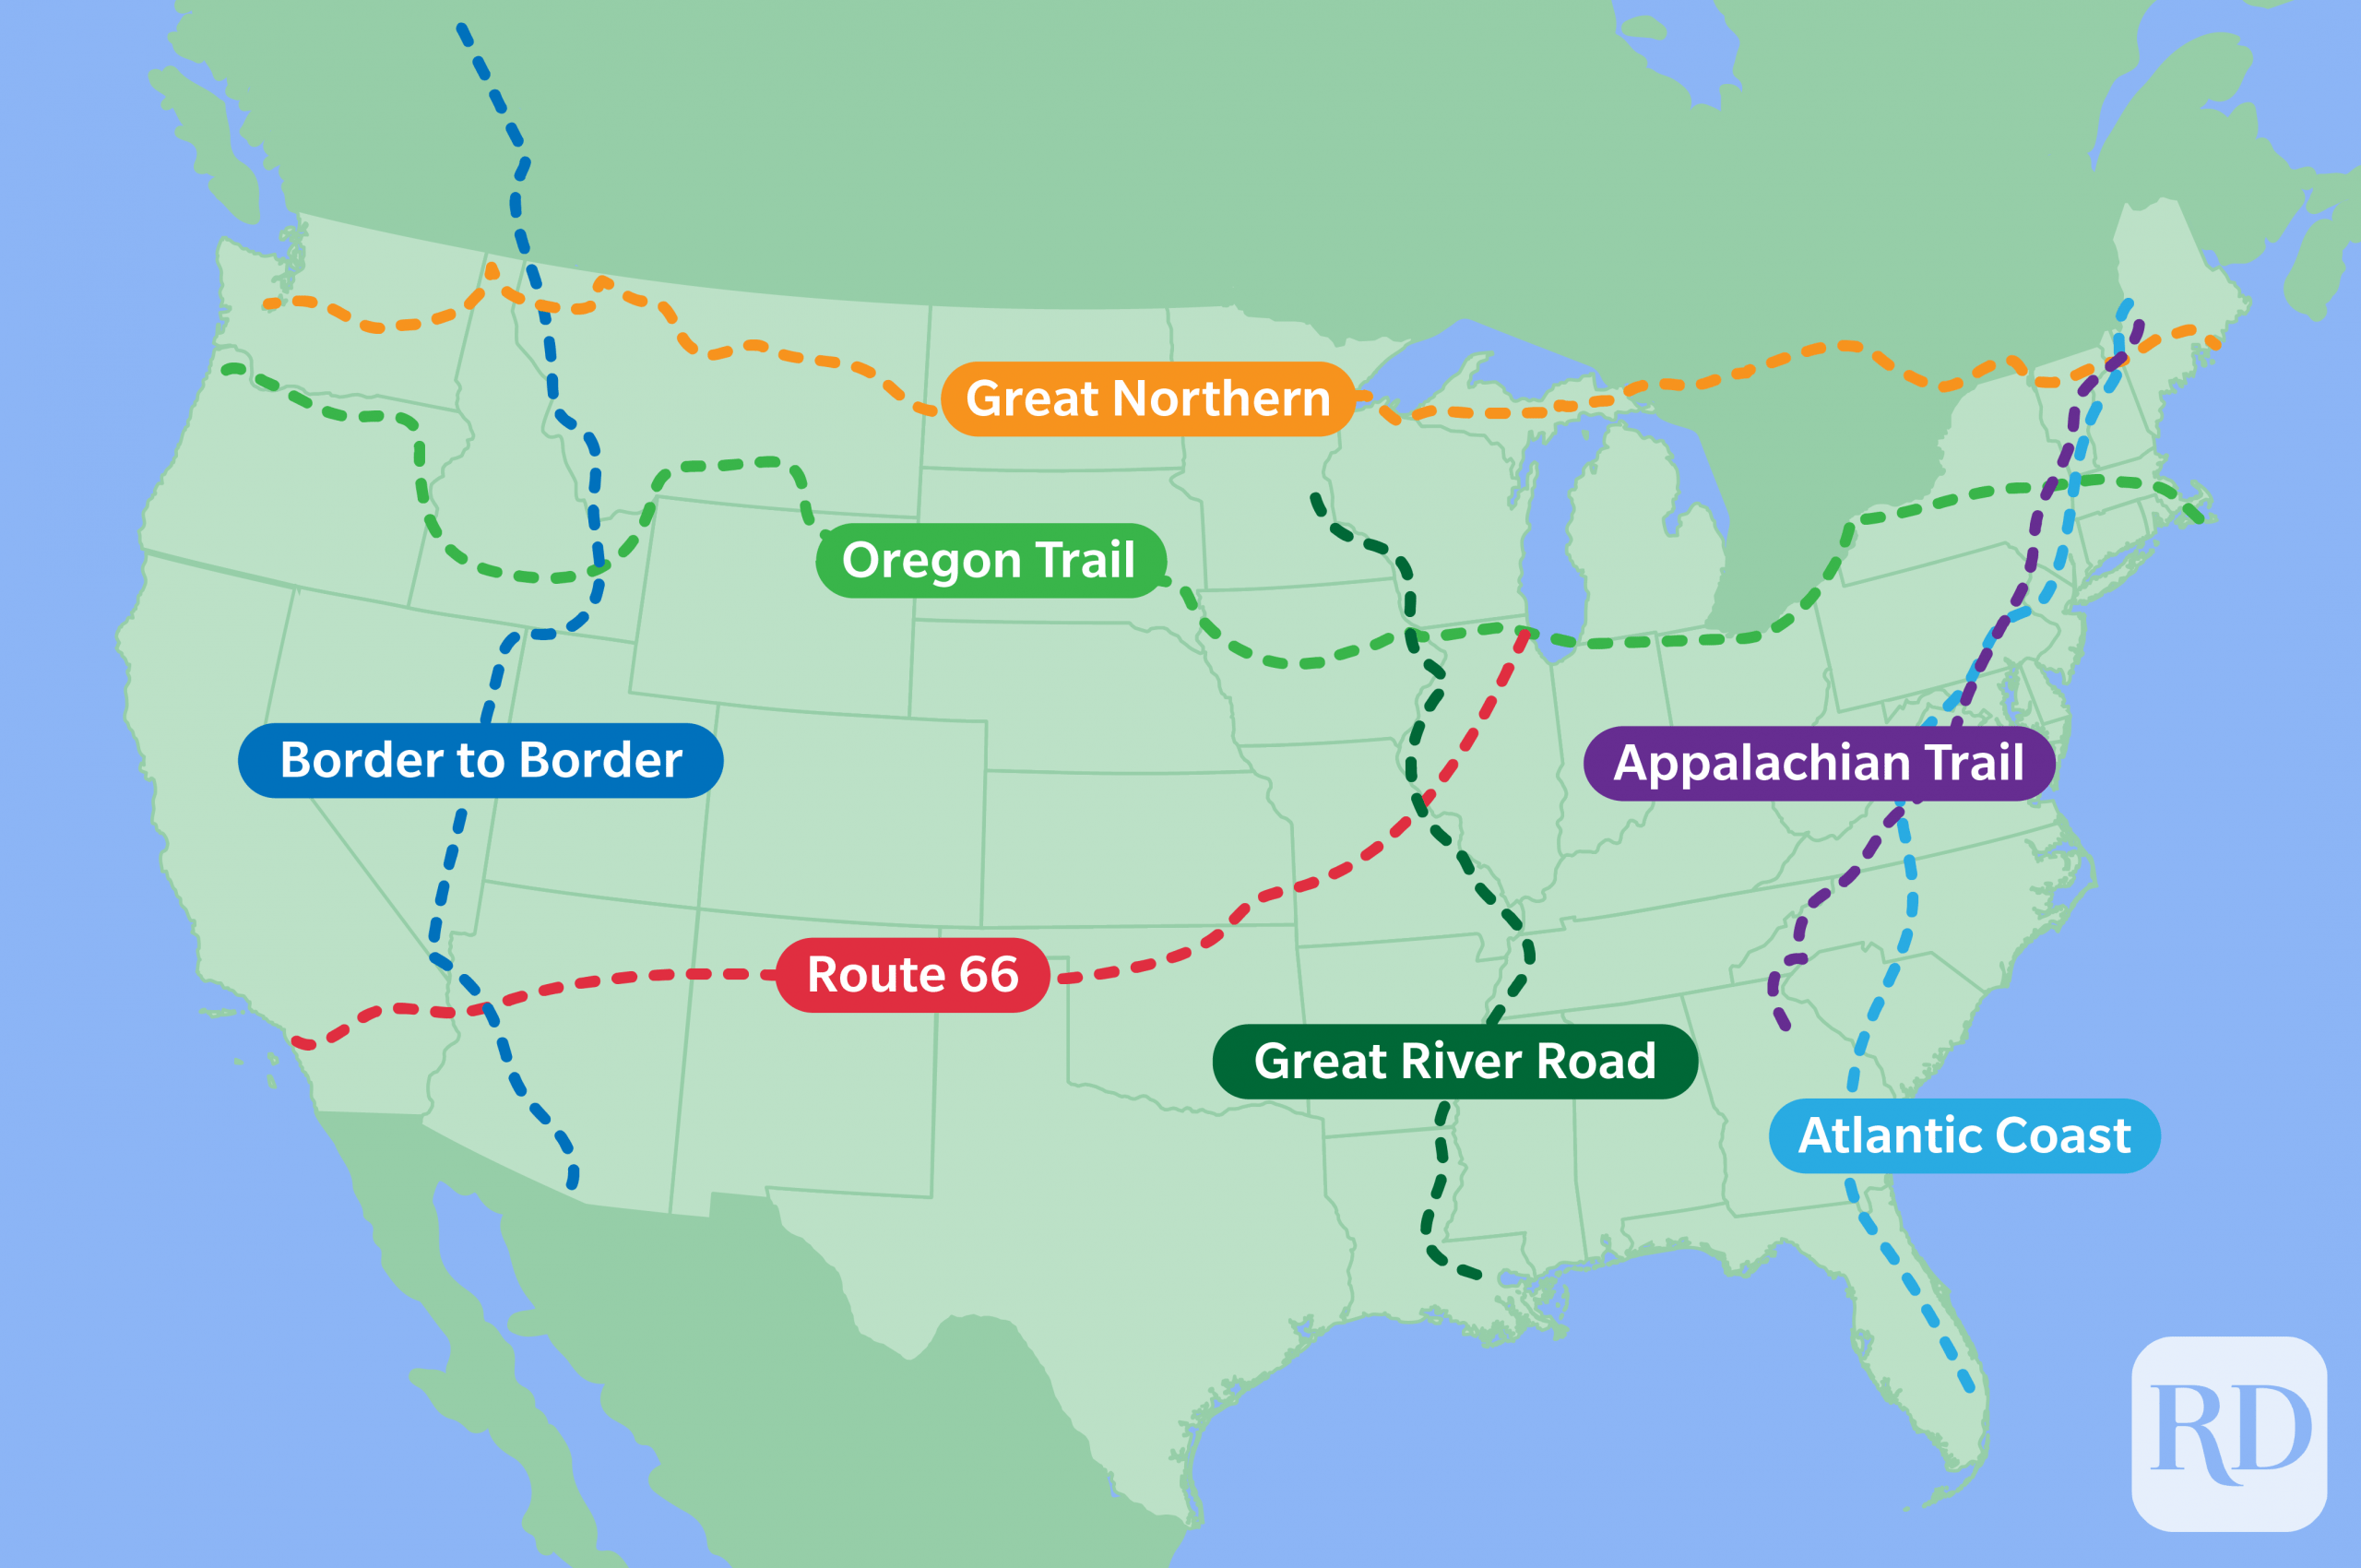 Map of united states with various road trip routes outlined in colorful dotted lines